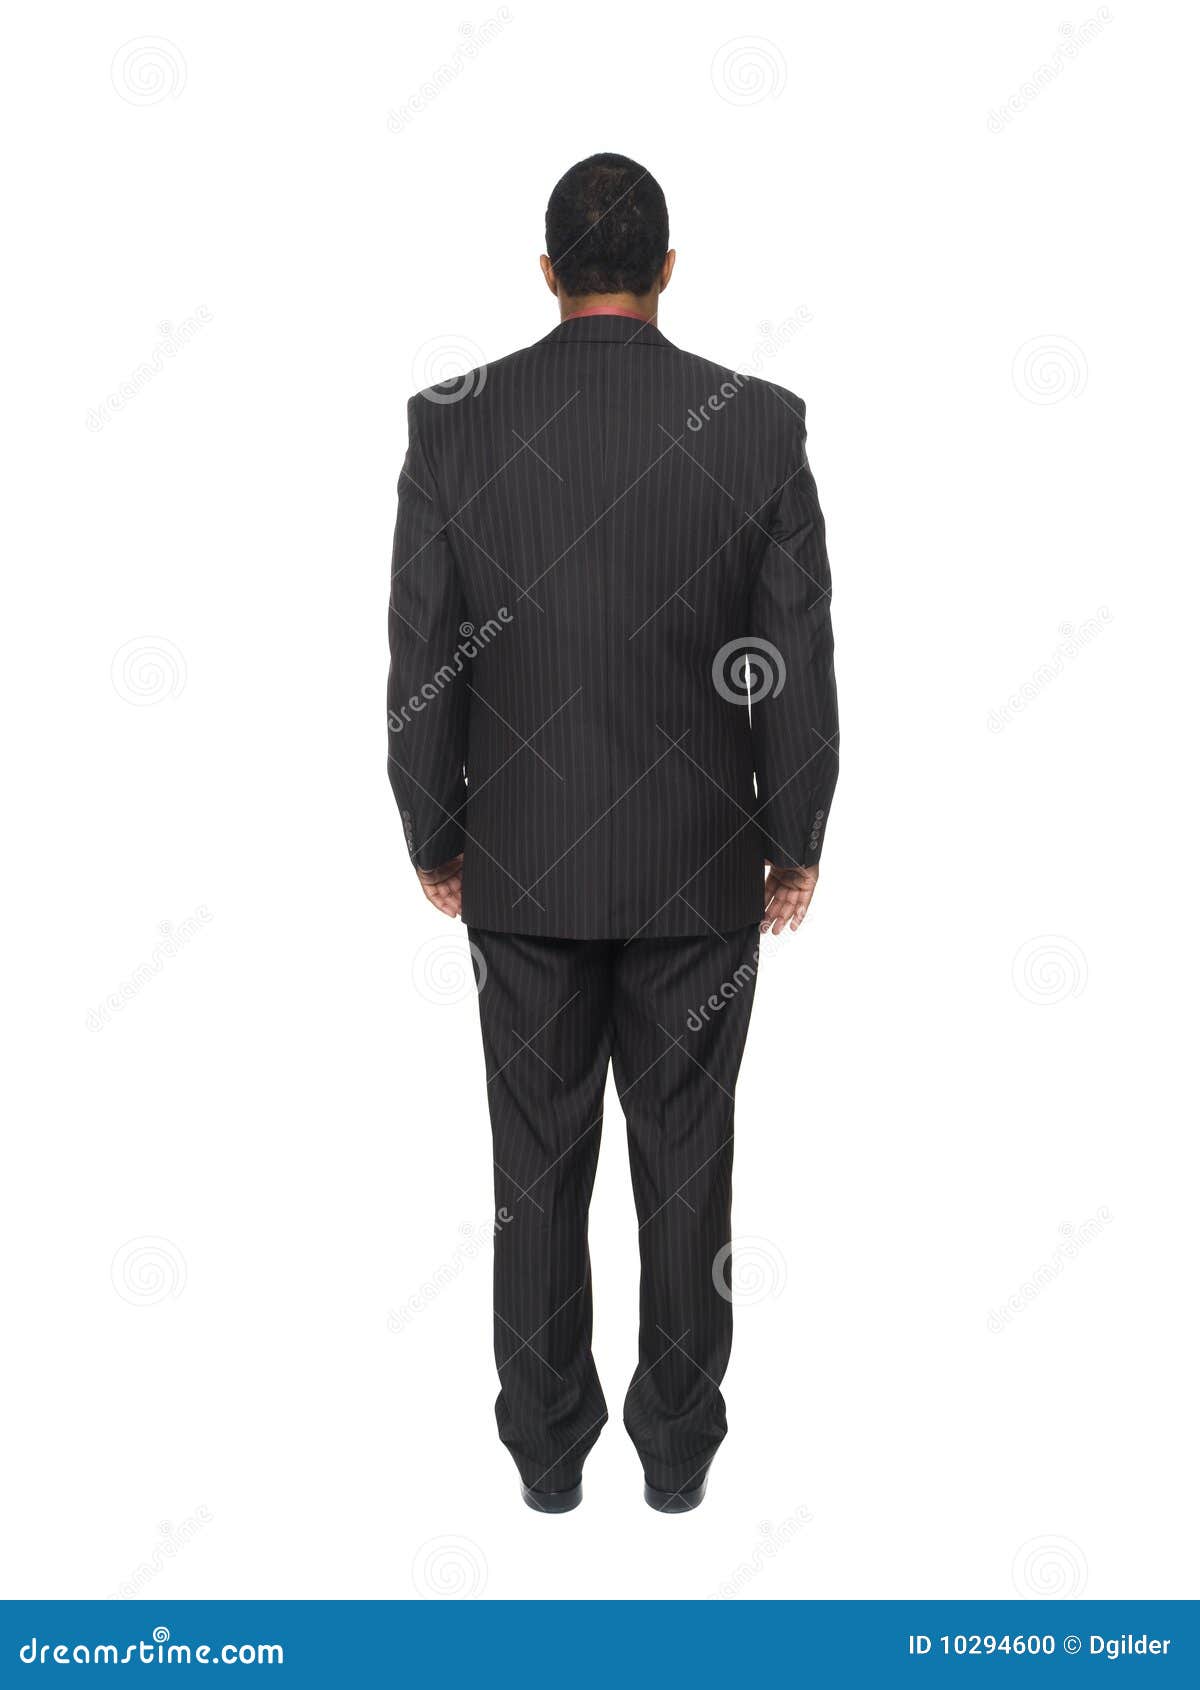 Businessman - rear view stock photo. Image of person - 10294600